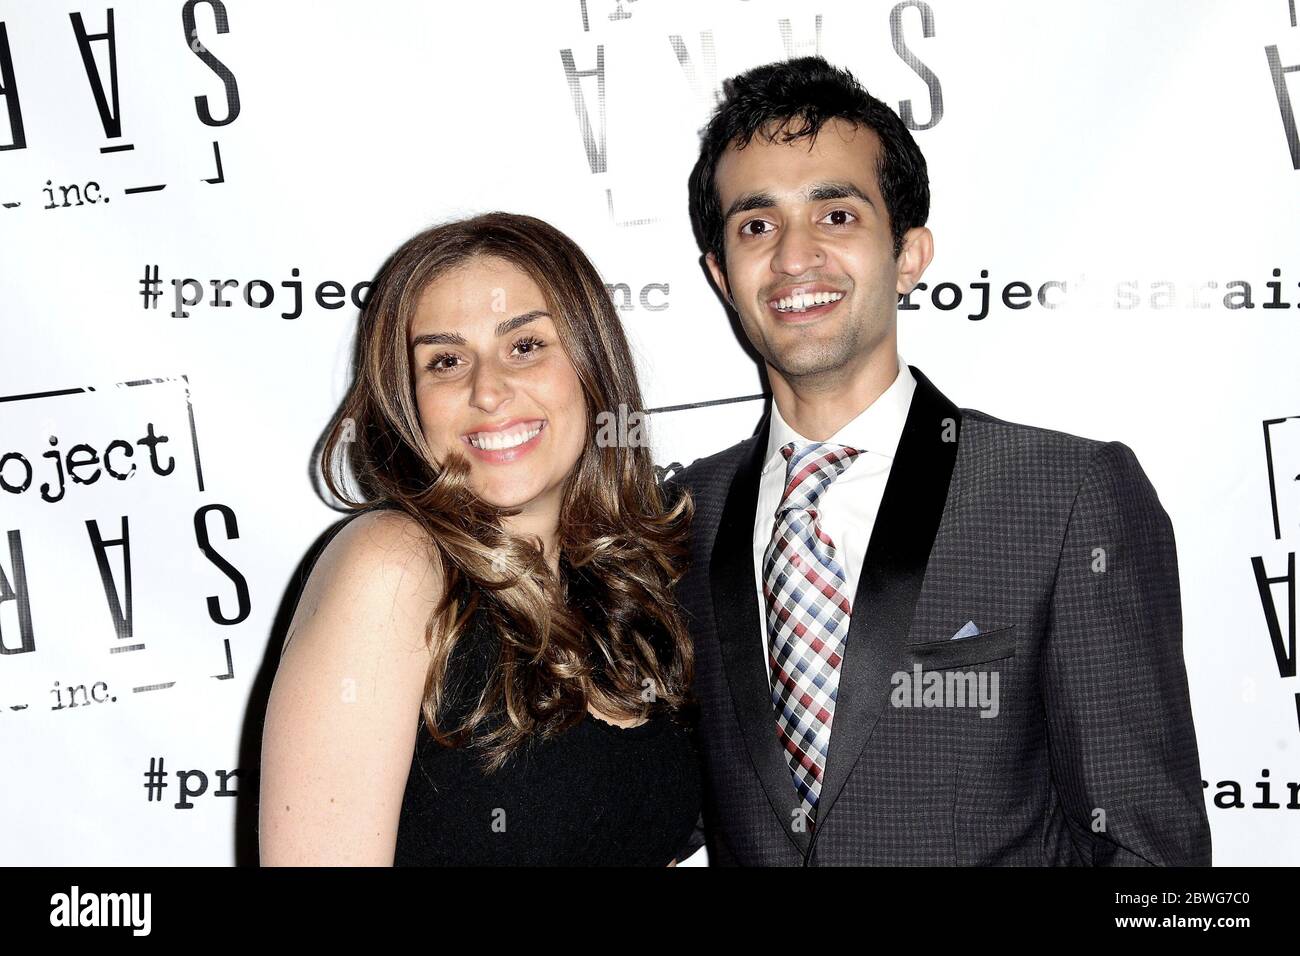 New York, NY, USA. 11 June, 2015. Z-100 NY overnight radio host, Shelley Rome, Project Sara Inc. Co-Founder, Viraj Borkar at the Launch Of Dining Reconstructed: An Off Menu Experience at The Starrett Leigh Building. Credit: Steve Mack/Alamy Stock Photo